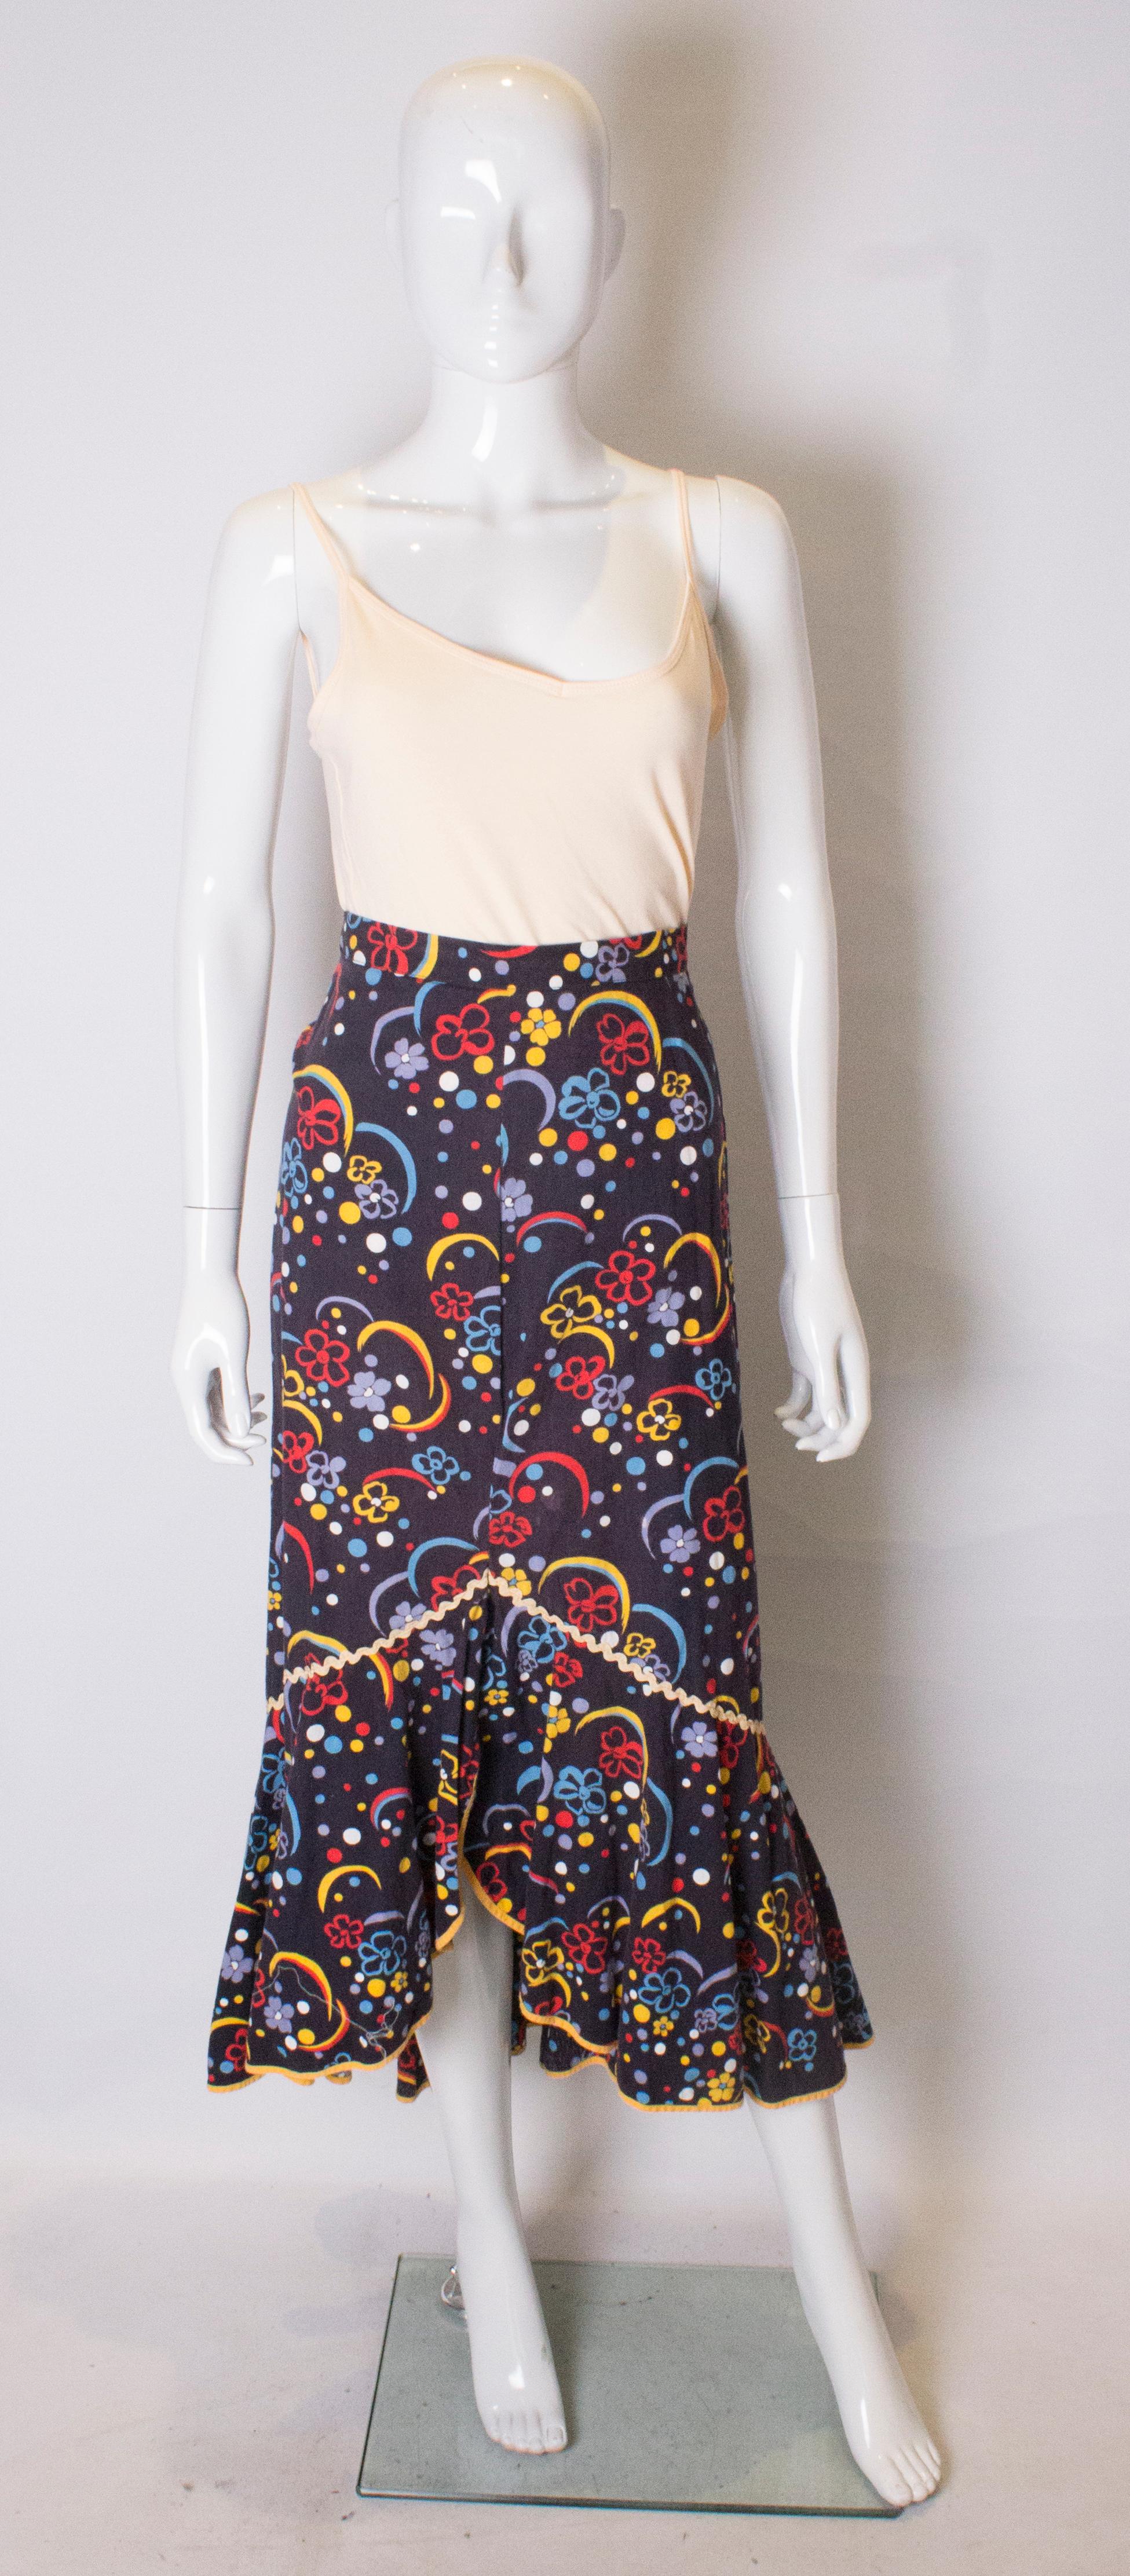 A great vintage cotton print skirt in a flamenco style. The skirt has a dark blue background with floral print, ivory trim on the body, and a large frill at the hem with a yellow trim.  It has a back central zip.